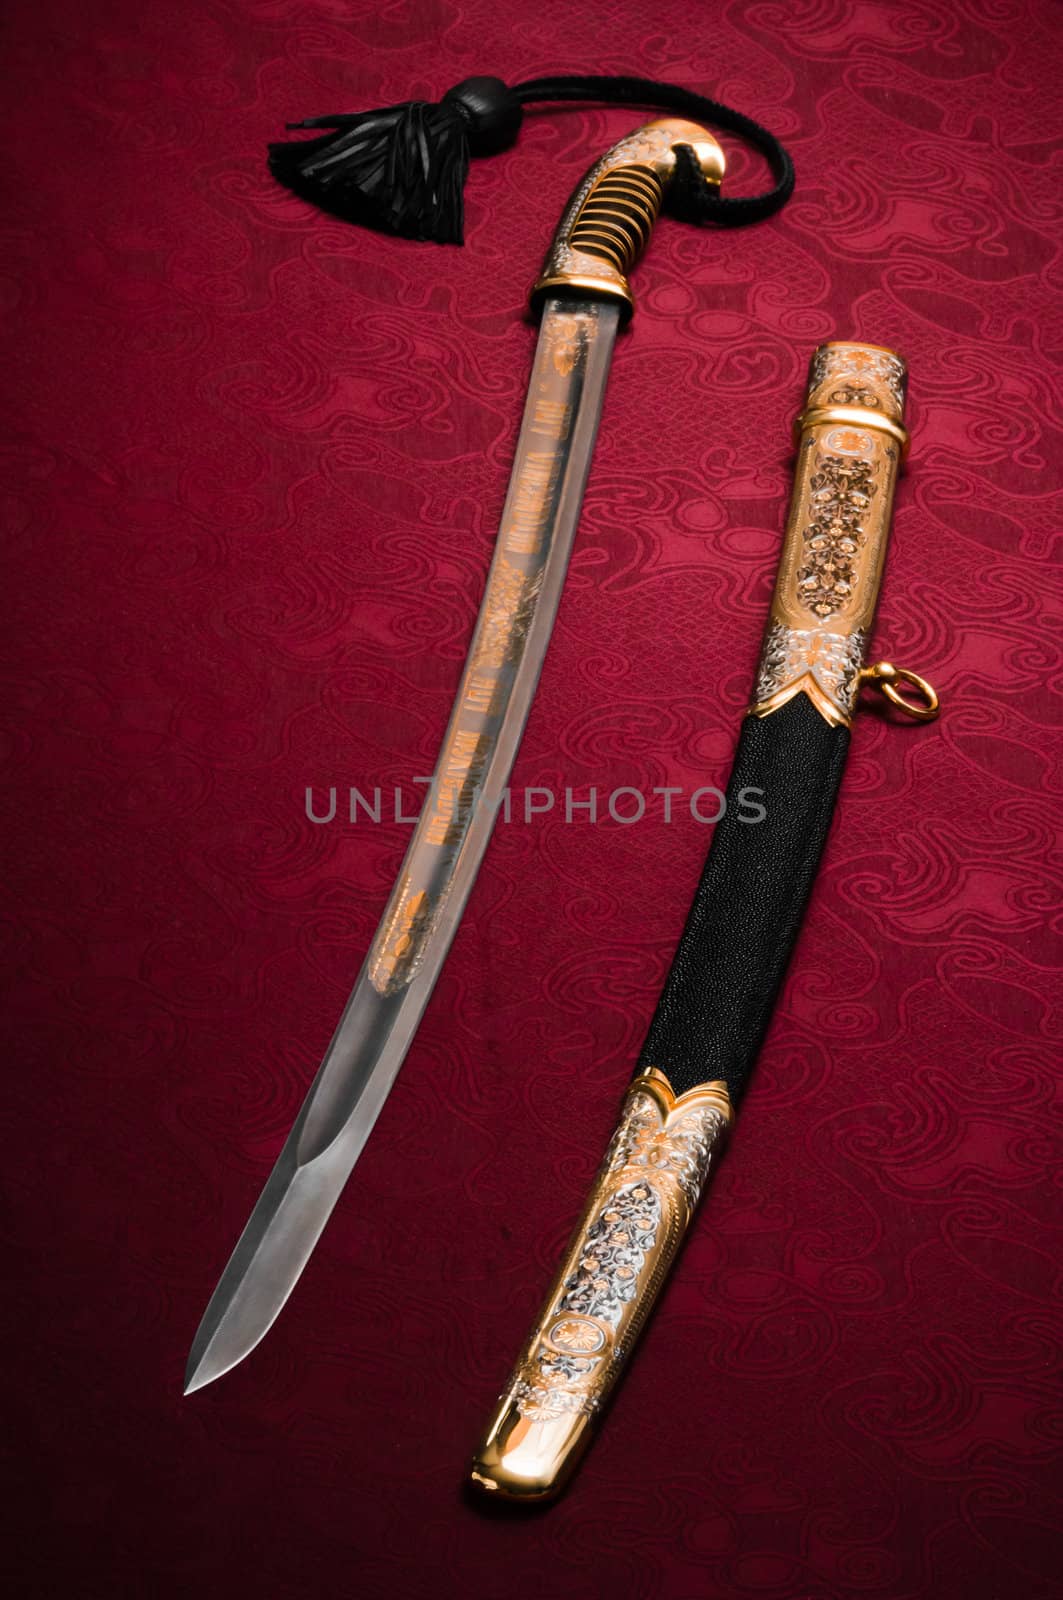 Ornated and old sword laying on red, flat background